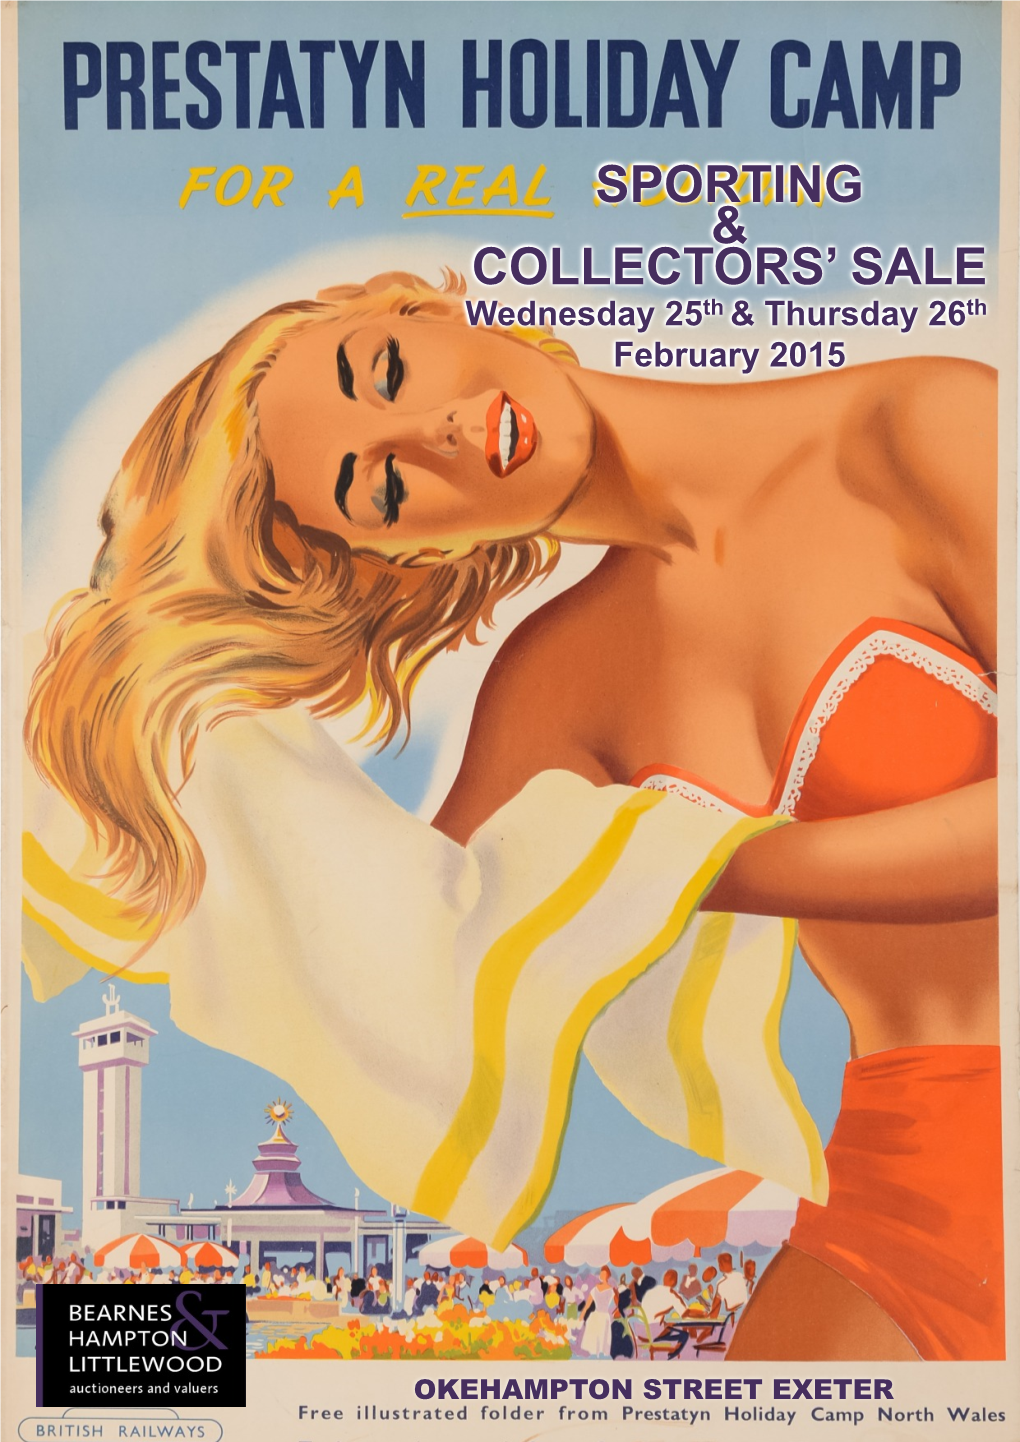 Sporting & Collectors' Sale